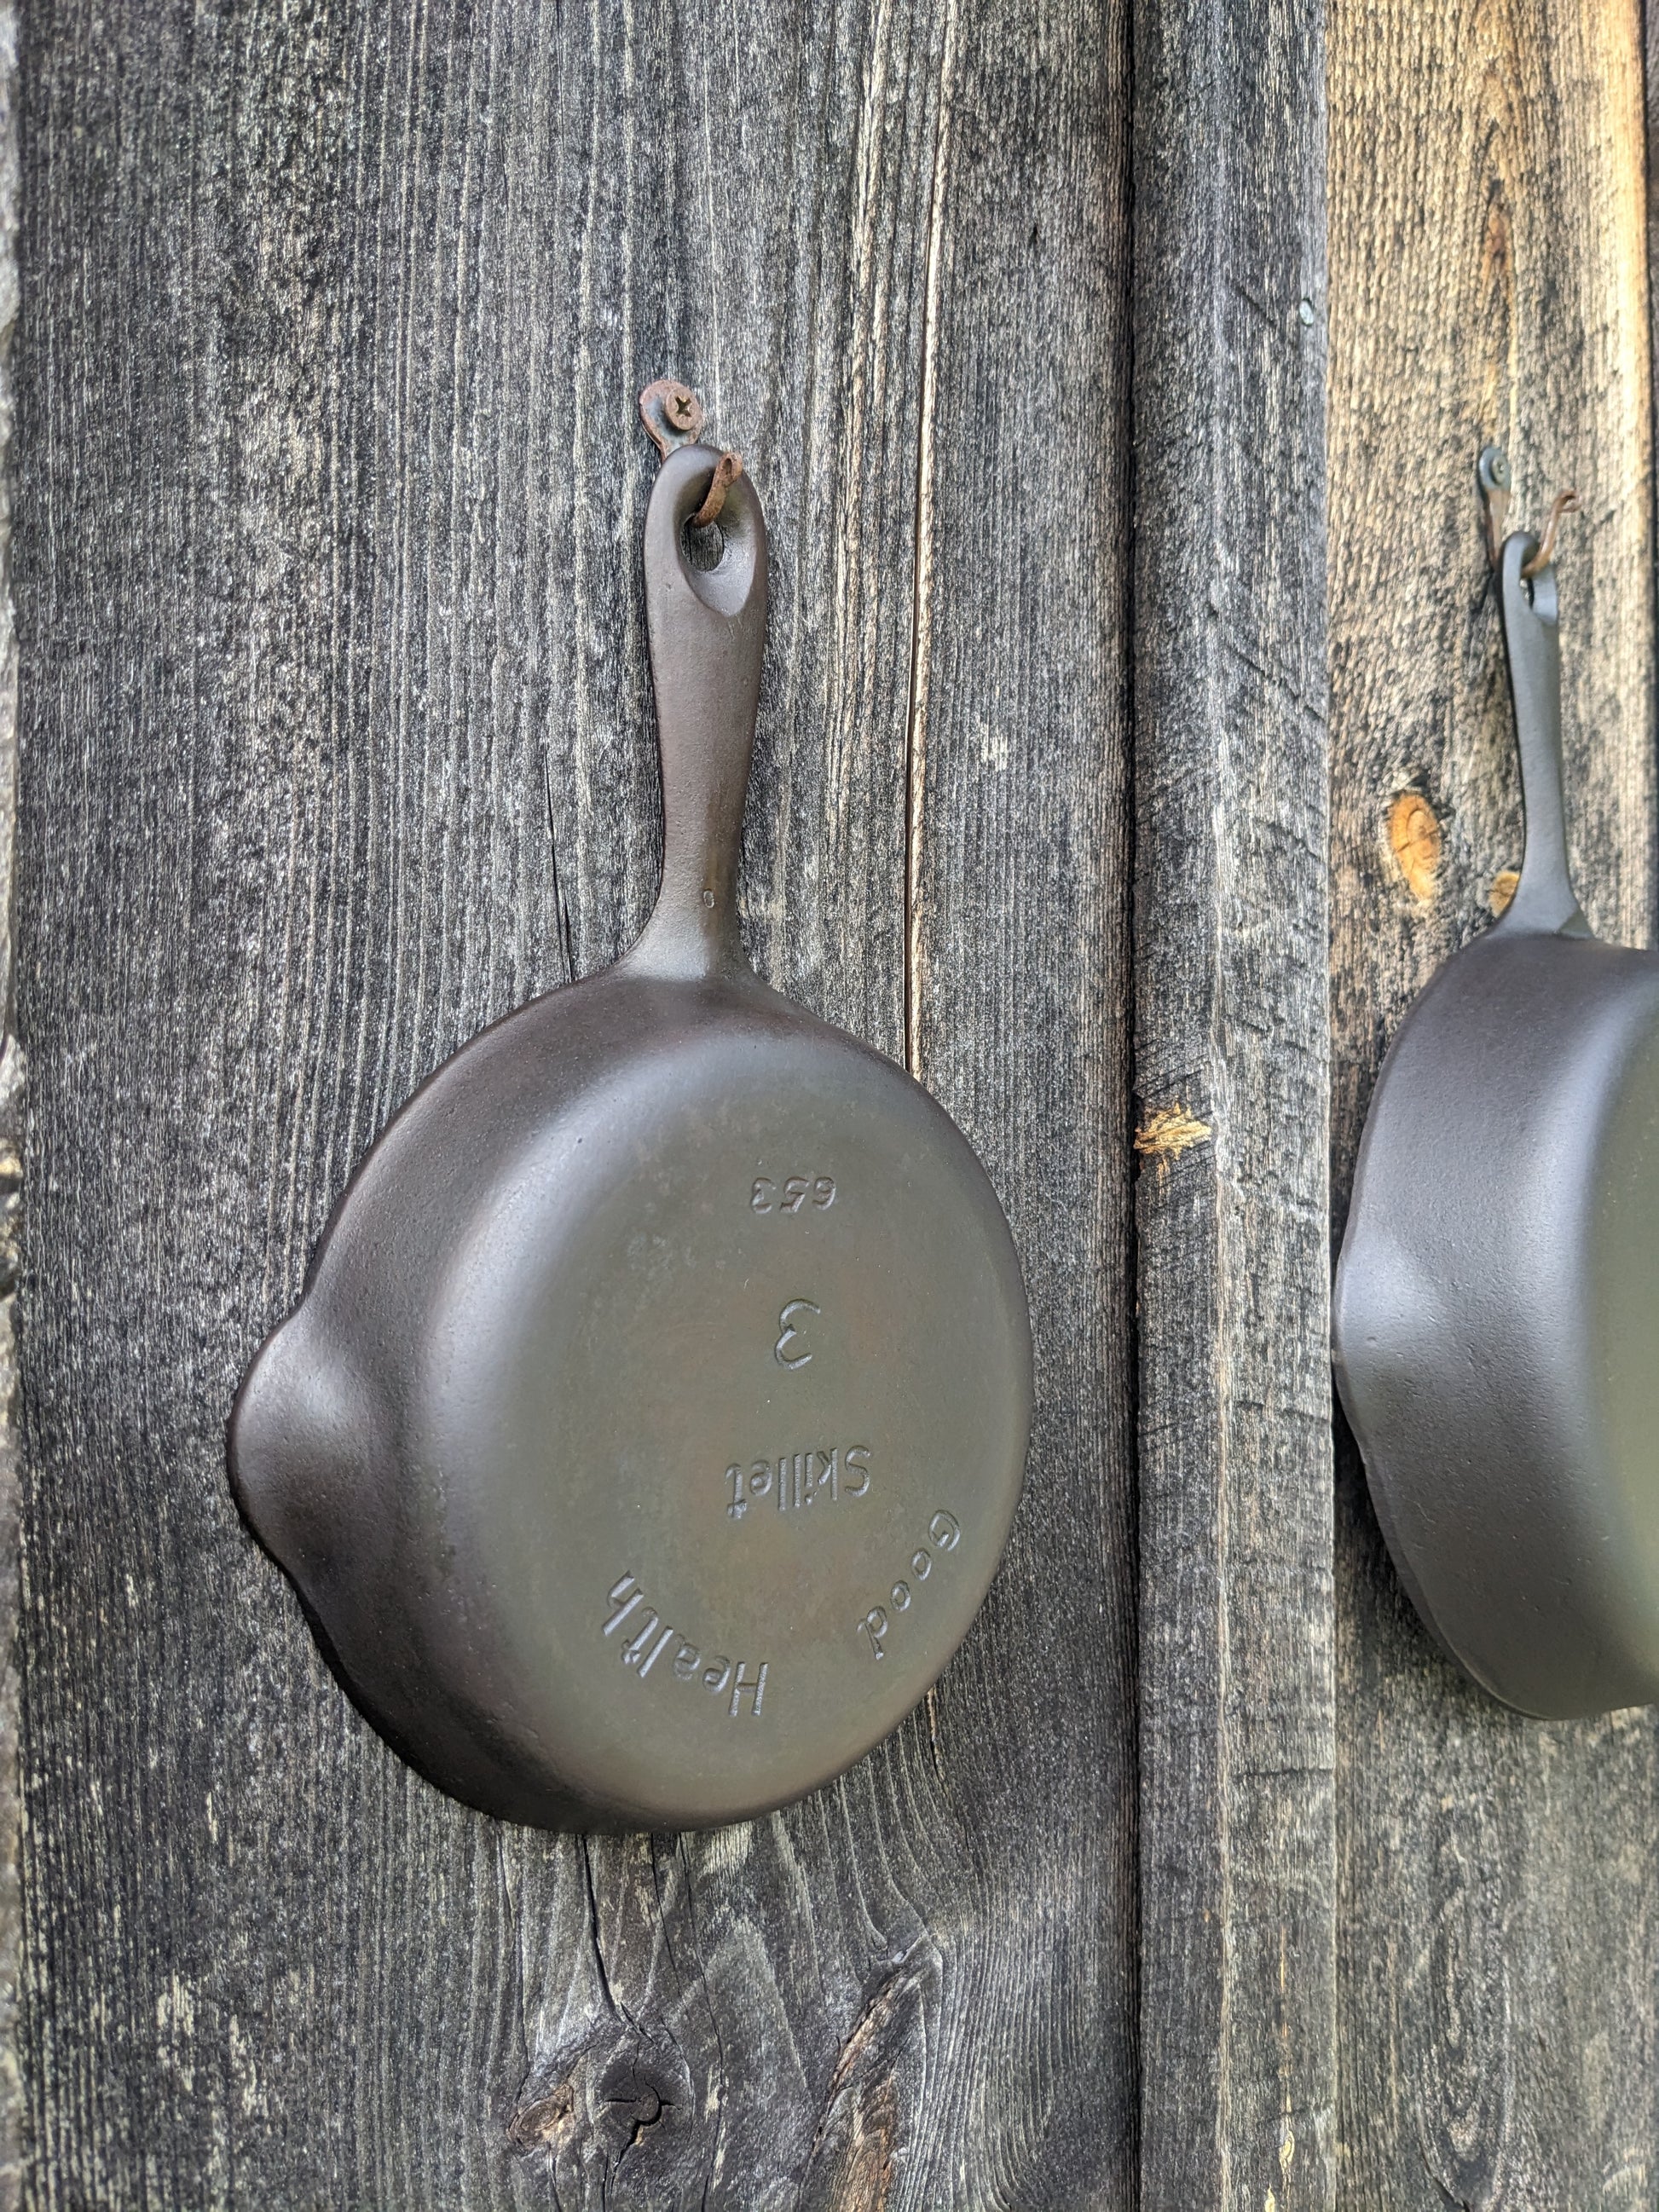 Cast Iron Skillets for sale in Chesterfield, Indiana